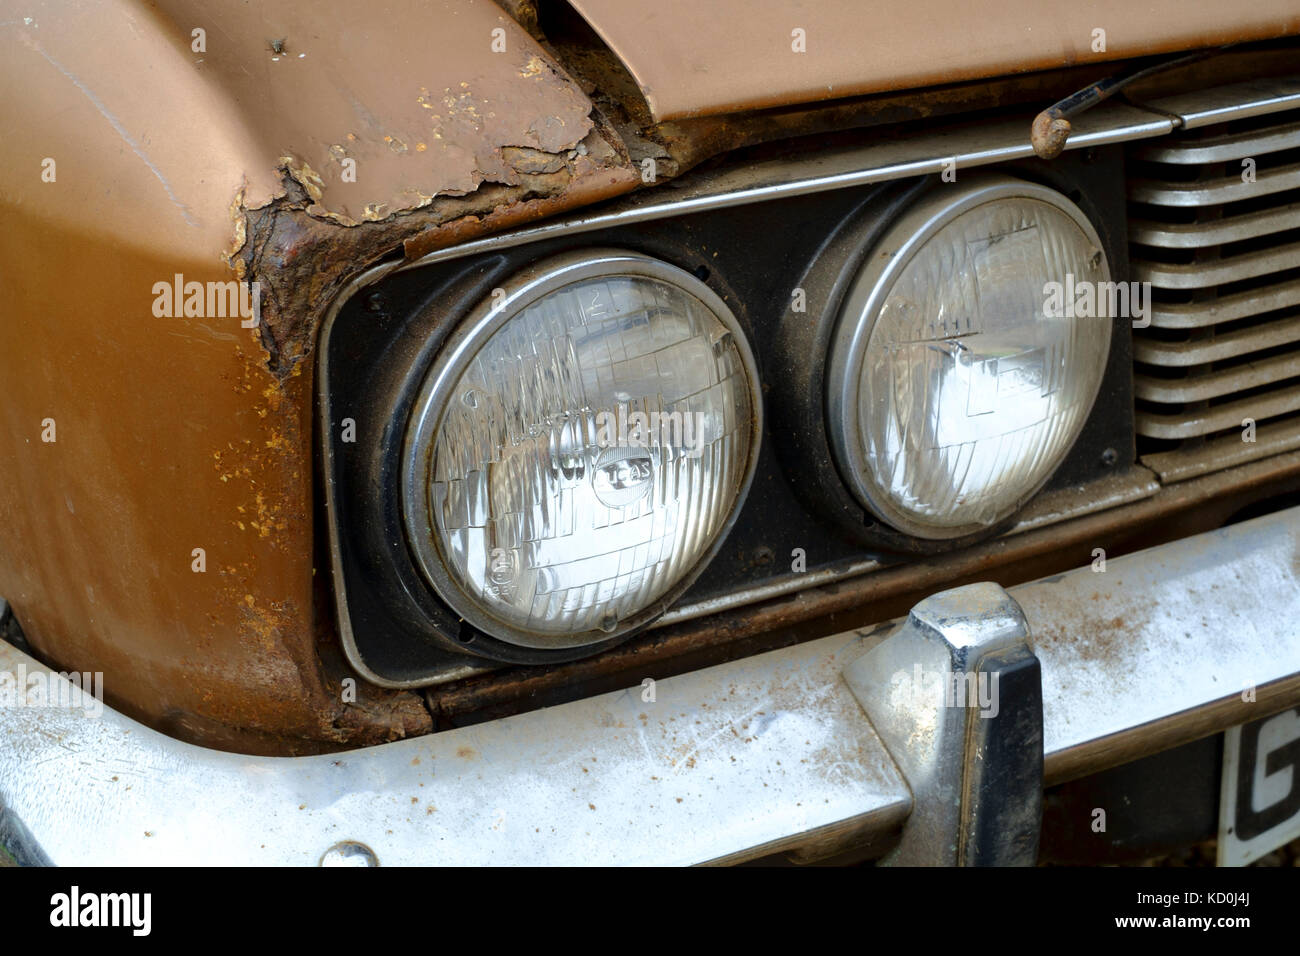 a barn find of a british sunbeam rapier car from the 1970s ready for restoration as a project showing corrosion around headlights on front wing Stock Photo